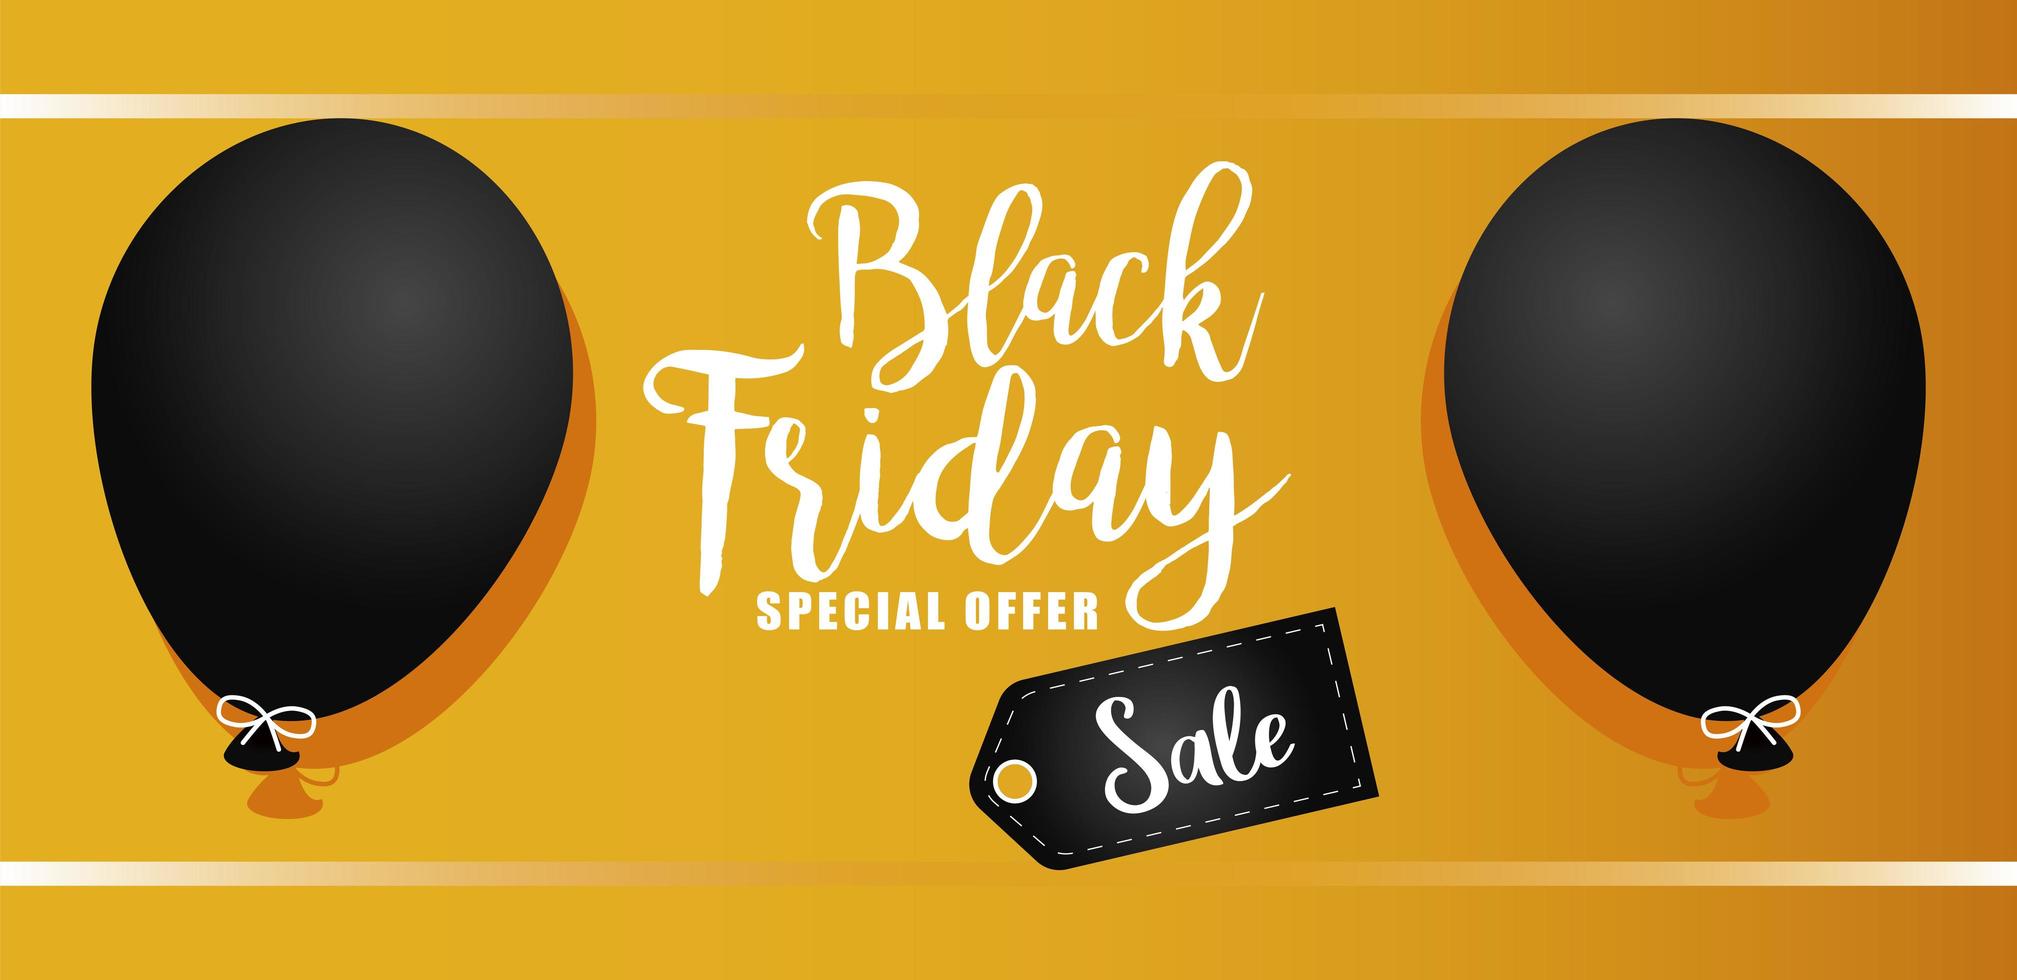 black friday sale lettering banner with balloons in yellow background vector